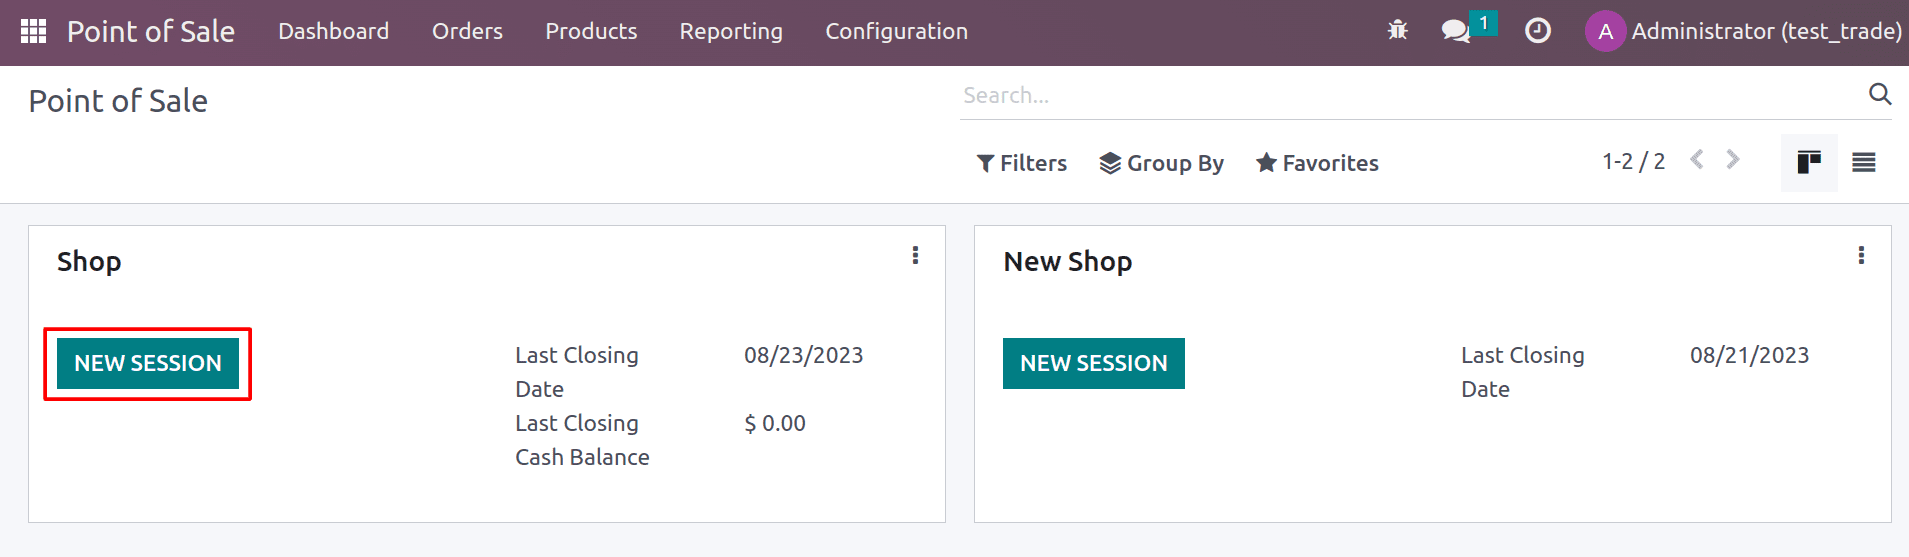 An Overview of Order Management & Rescue Session in Odoo 16 POS-cybrosys